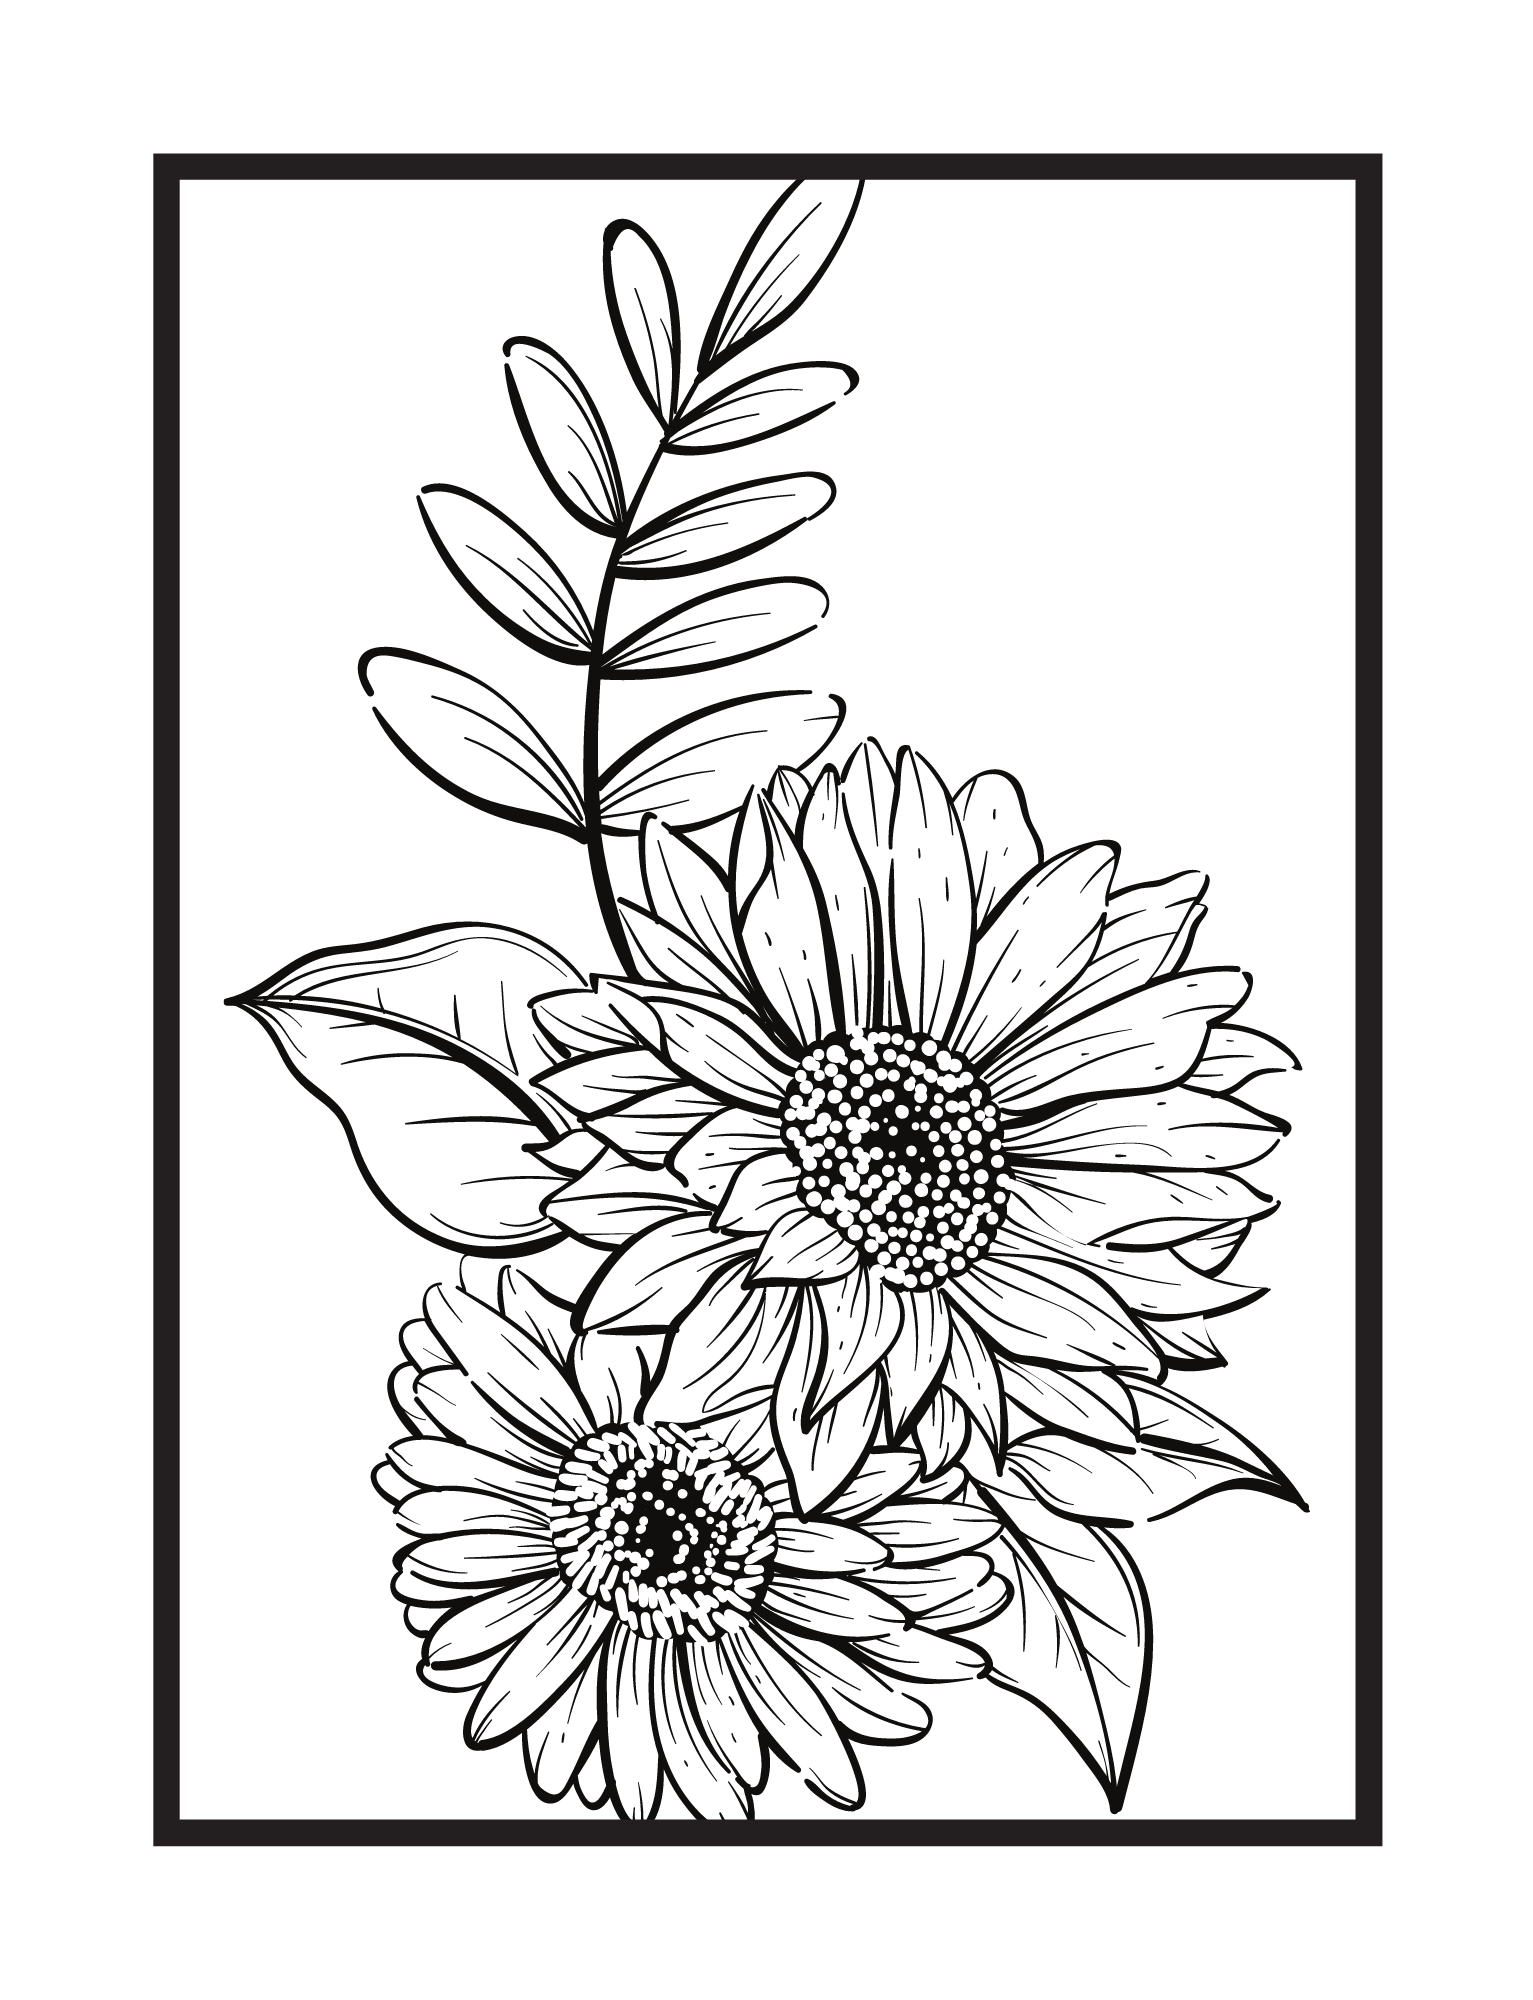 I WILL CREATE UNIQUE AND BEAUTIFUL COLORING PAGES FOR KIDS AND ADULTS 